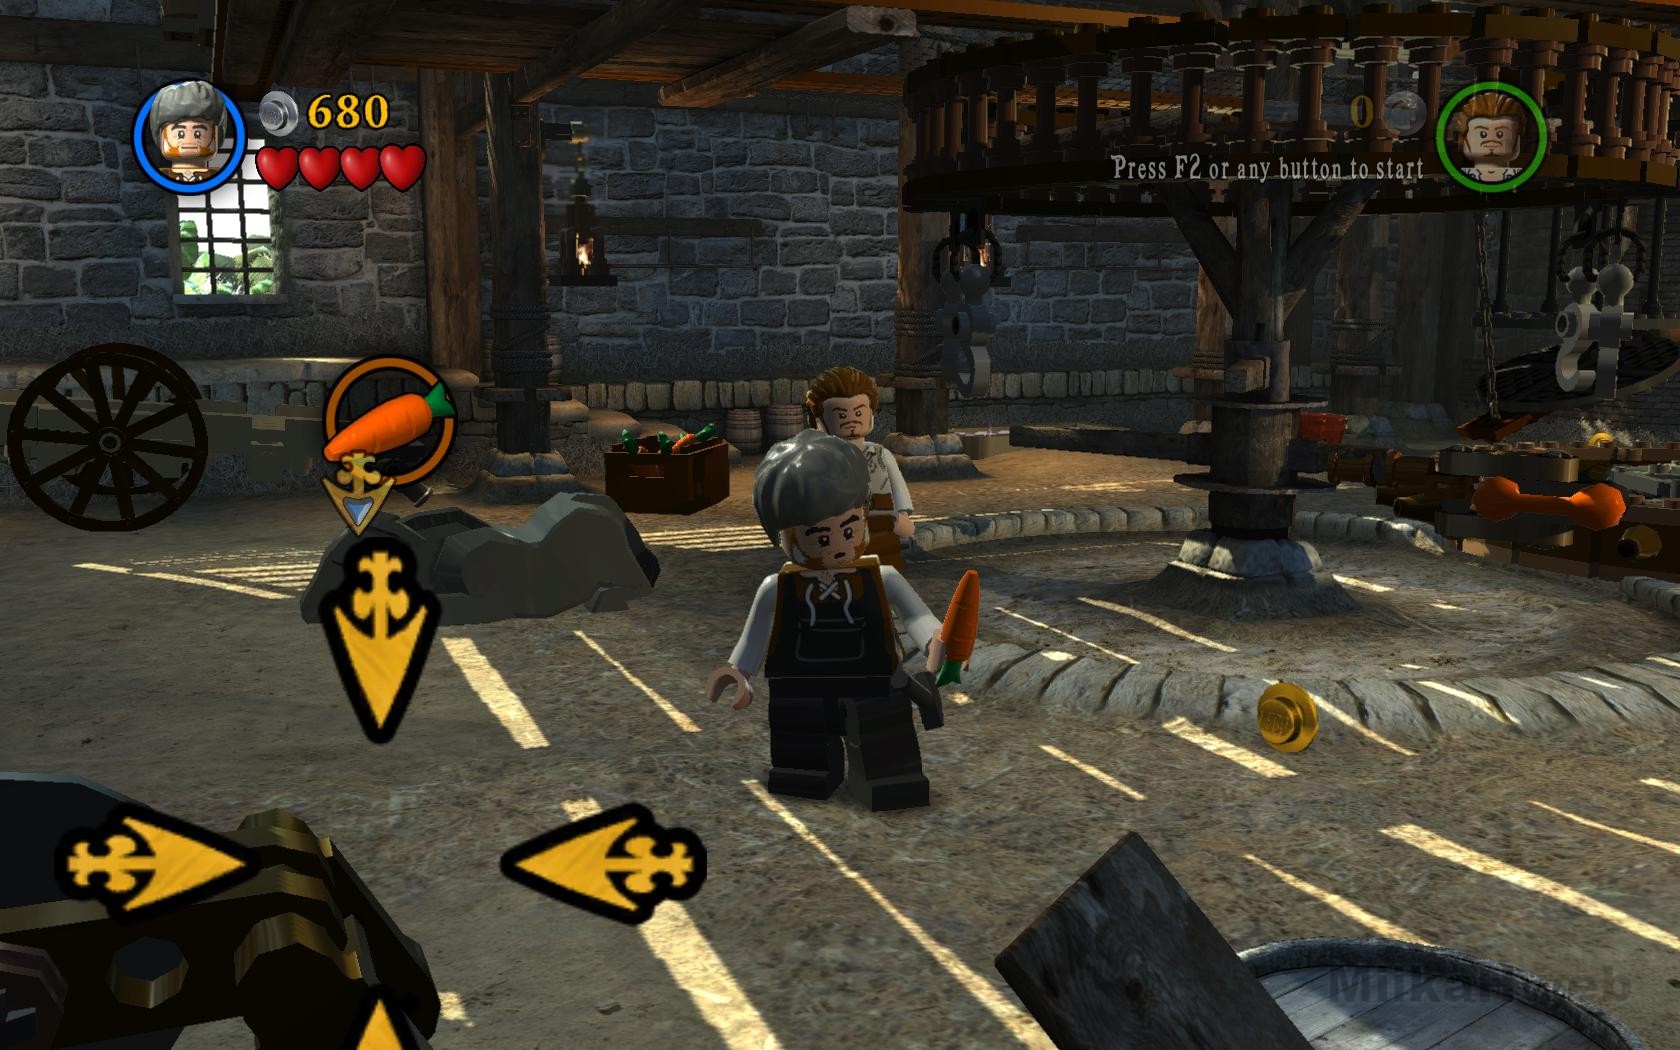 LEGO Pirates Of The Caribbean: The Video Game HD wallpapers, Desktop wallpaper - most viewed